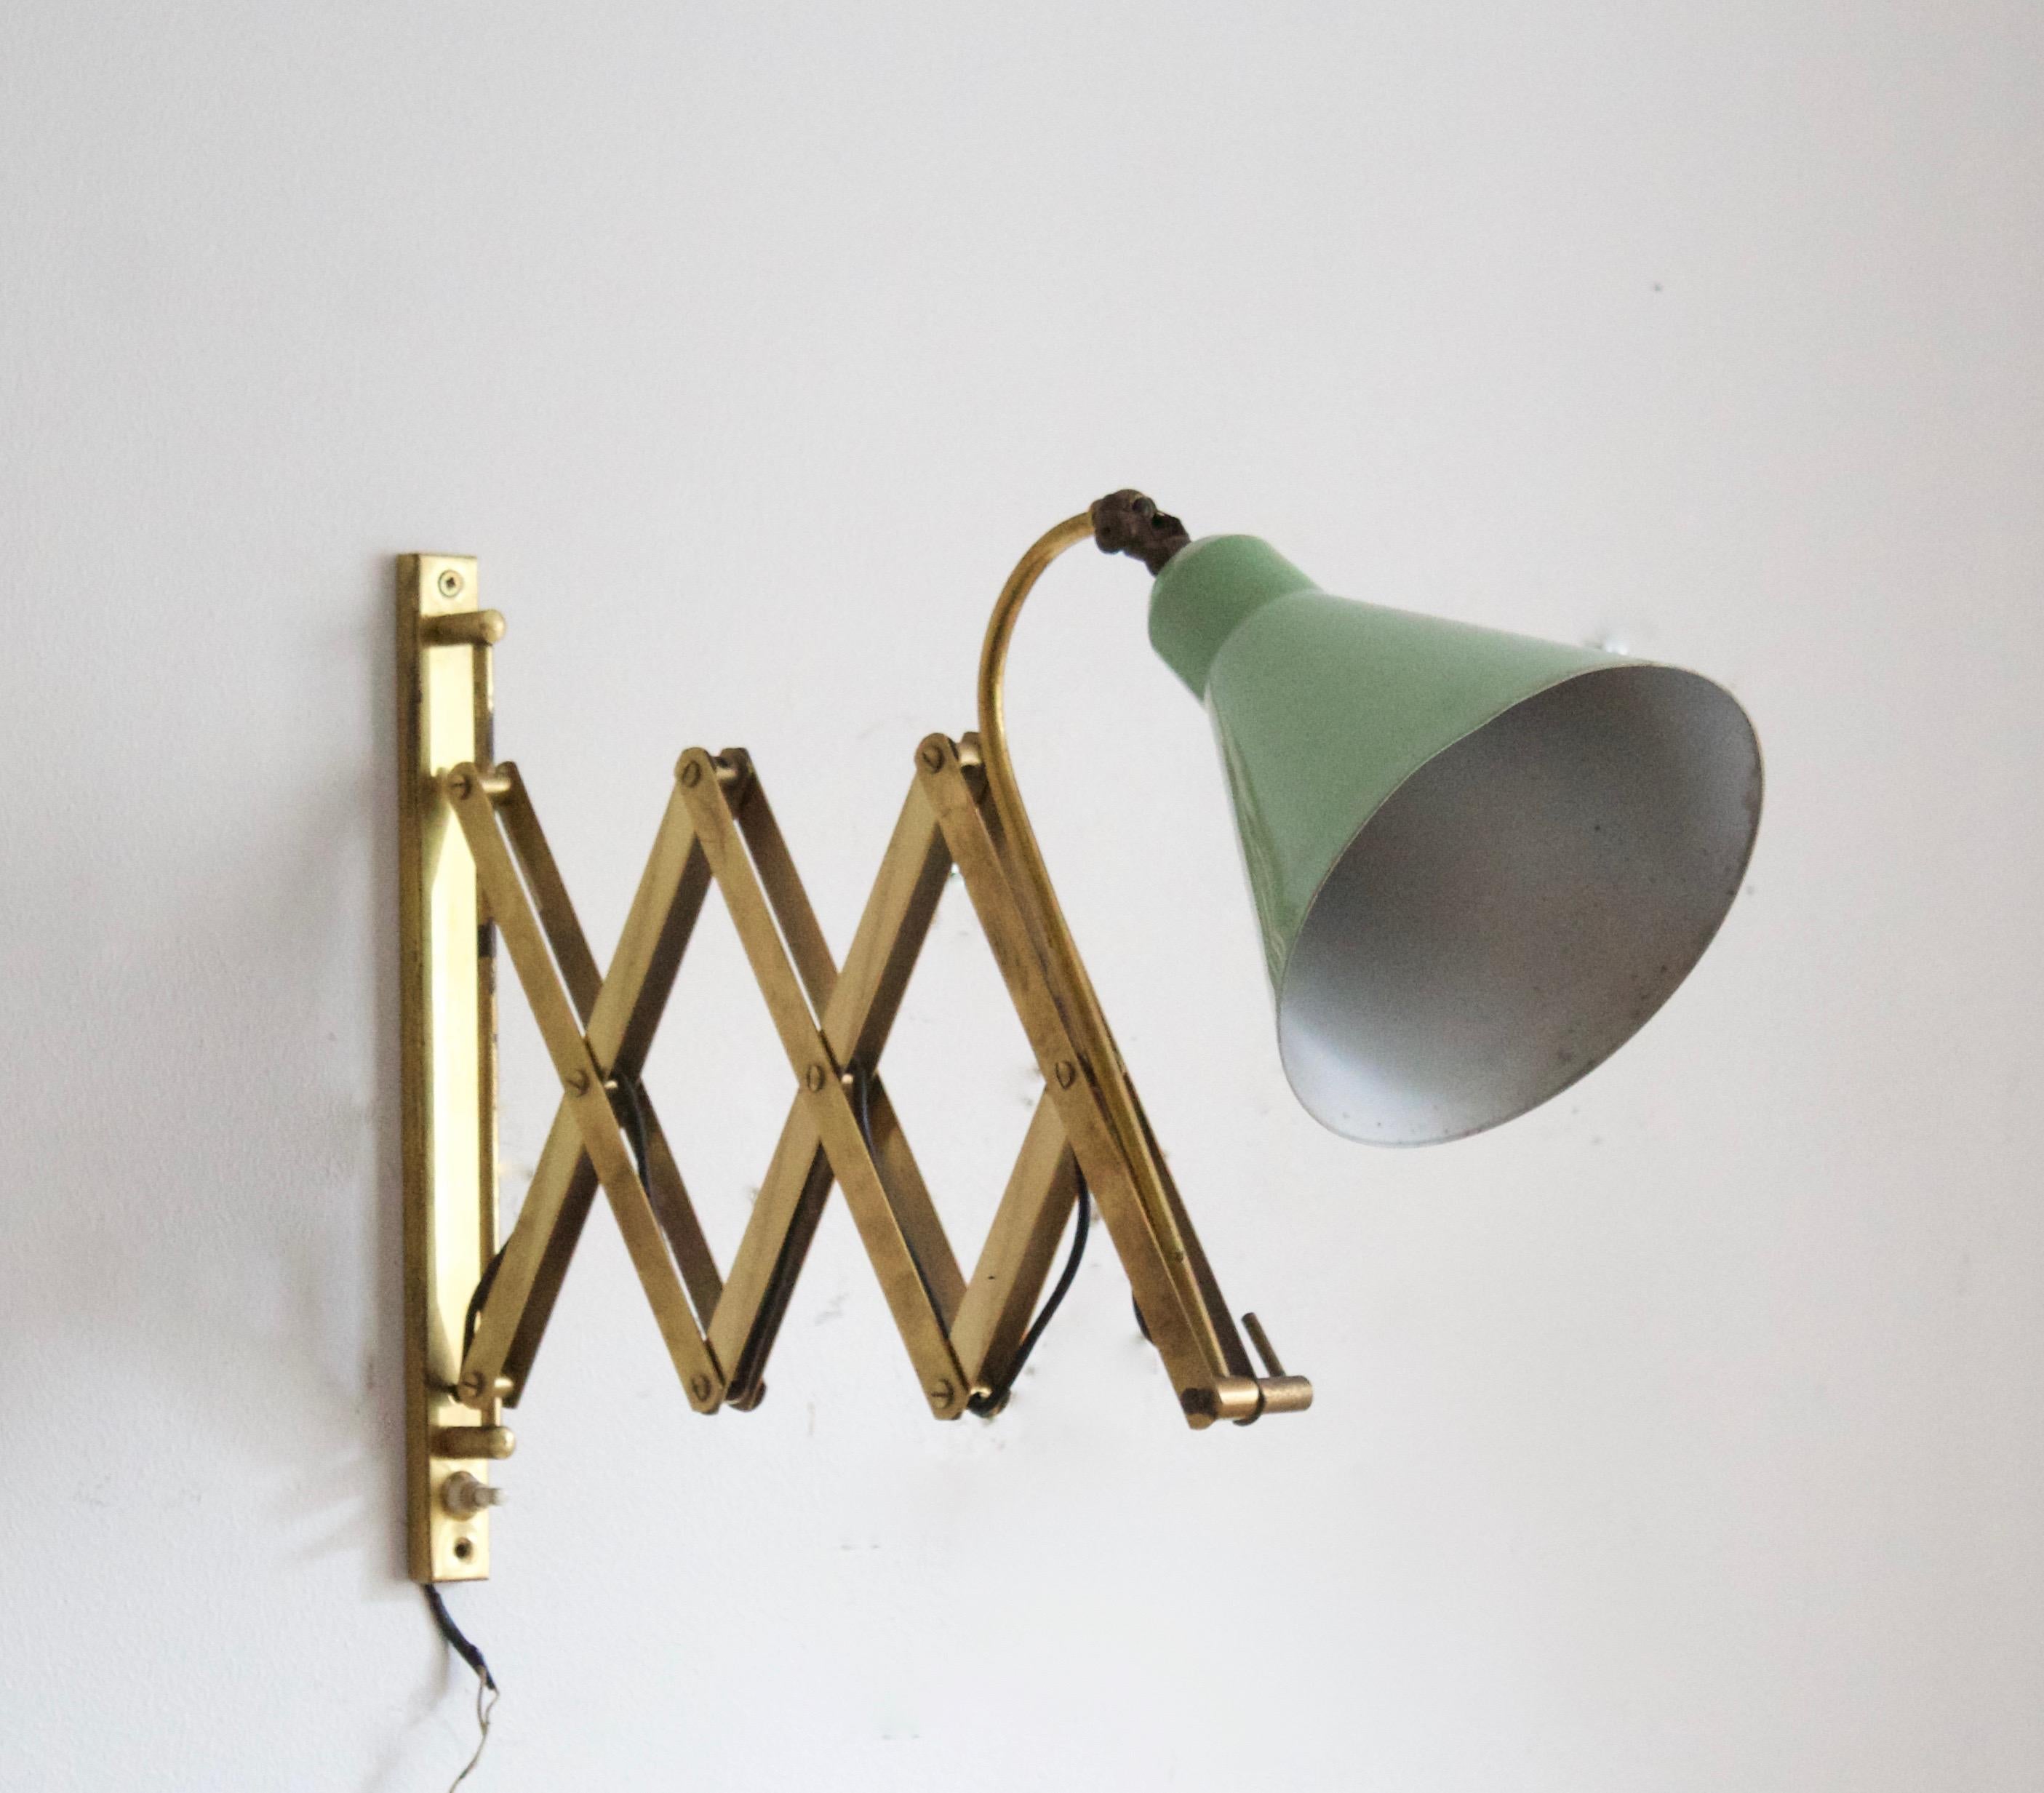 A sizable wall light / task light. Designed and produced in Italy, 1940s.

Other designers of the period include Paavo Tynell, Jean Royère, Hans Bergström, Hans-Agne Jakobsson, and Kaare Klint.